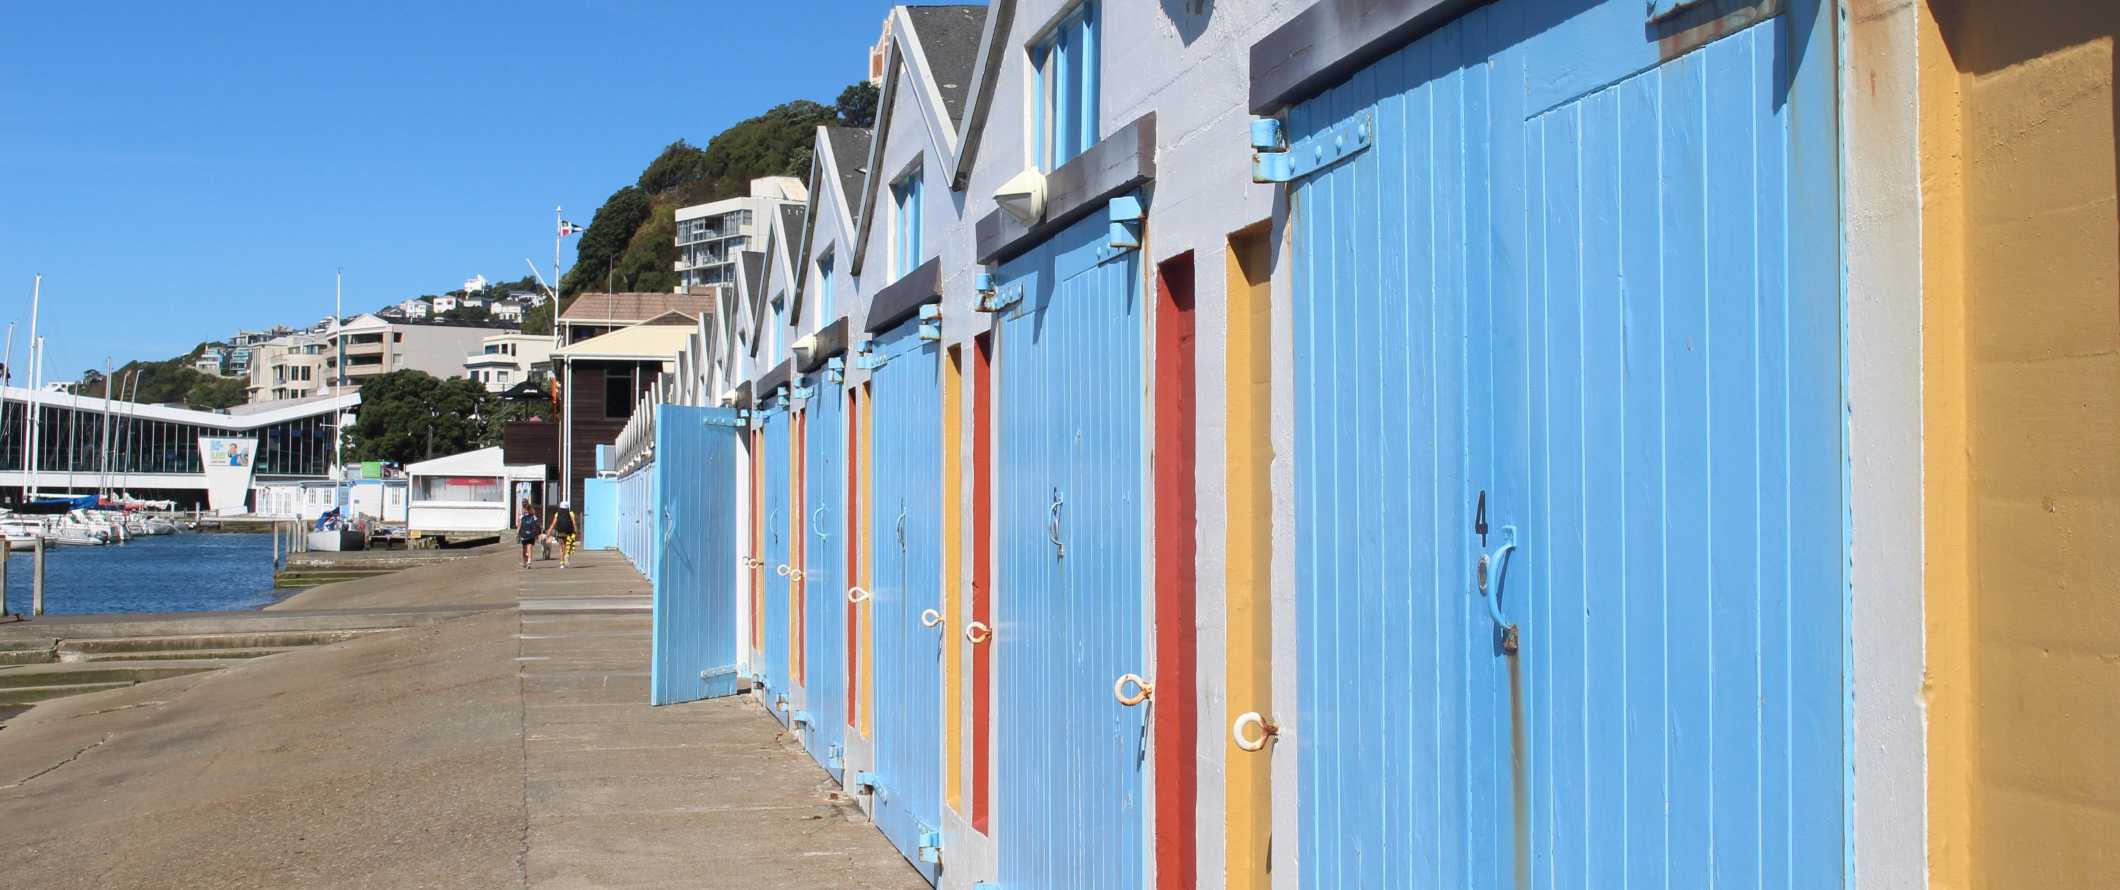 Brightly colored boat and storage huts along the harborfront in Wellington, New Zealand.